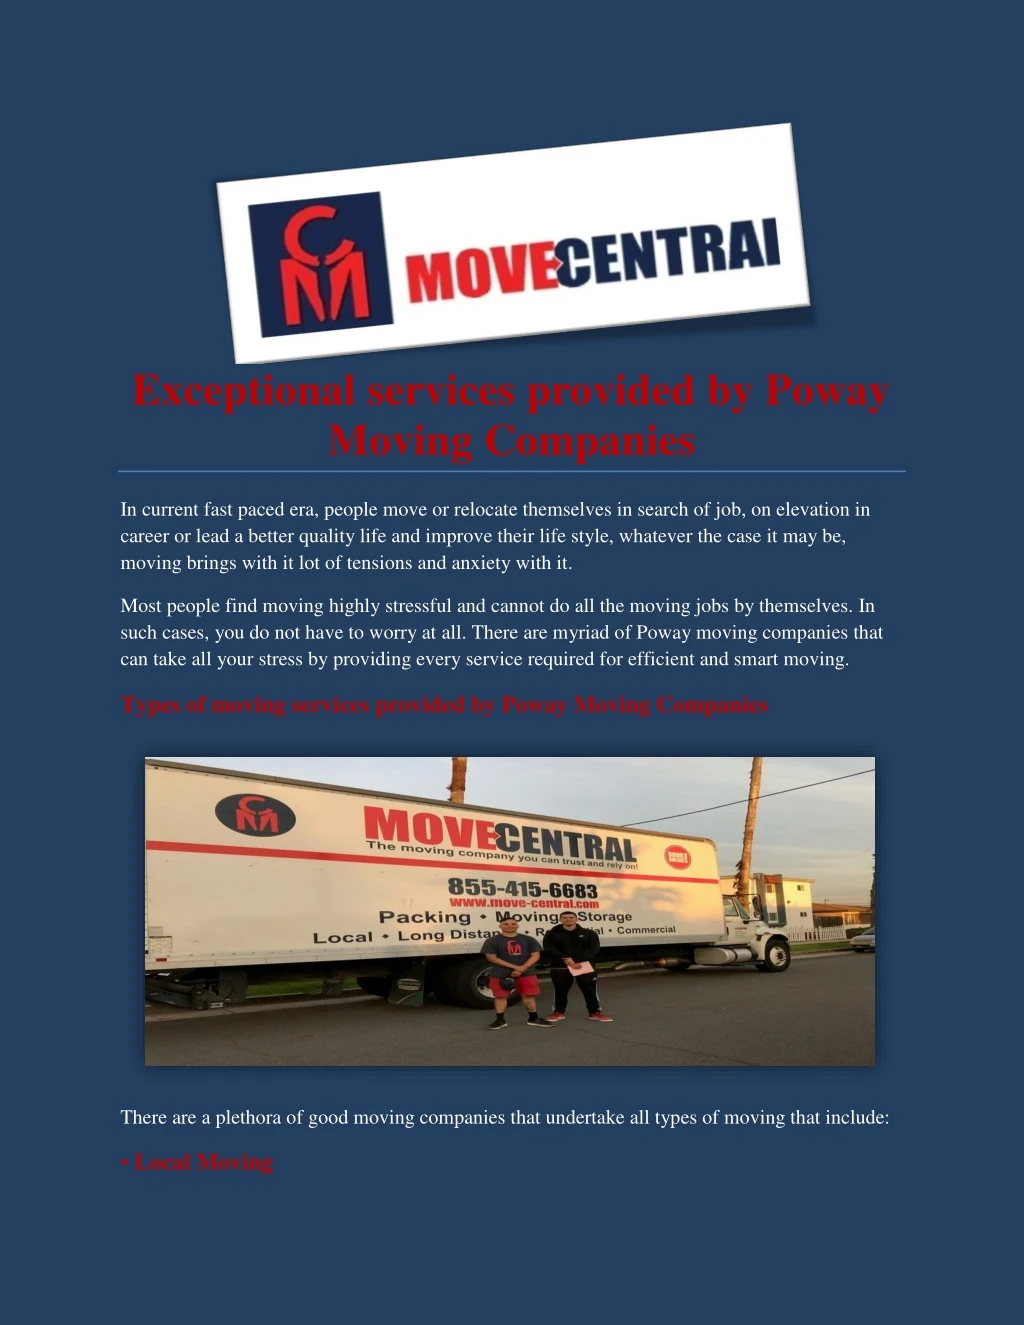 exceptional services provided by poway moving